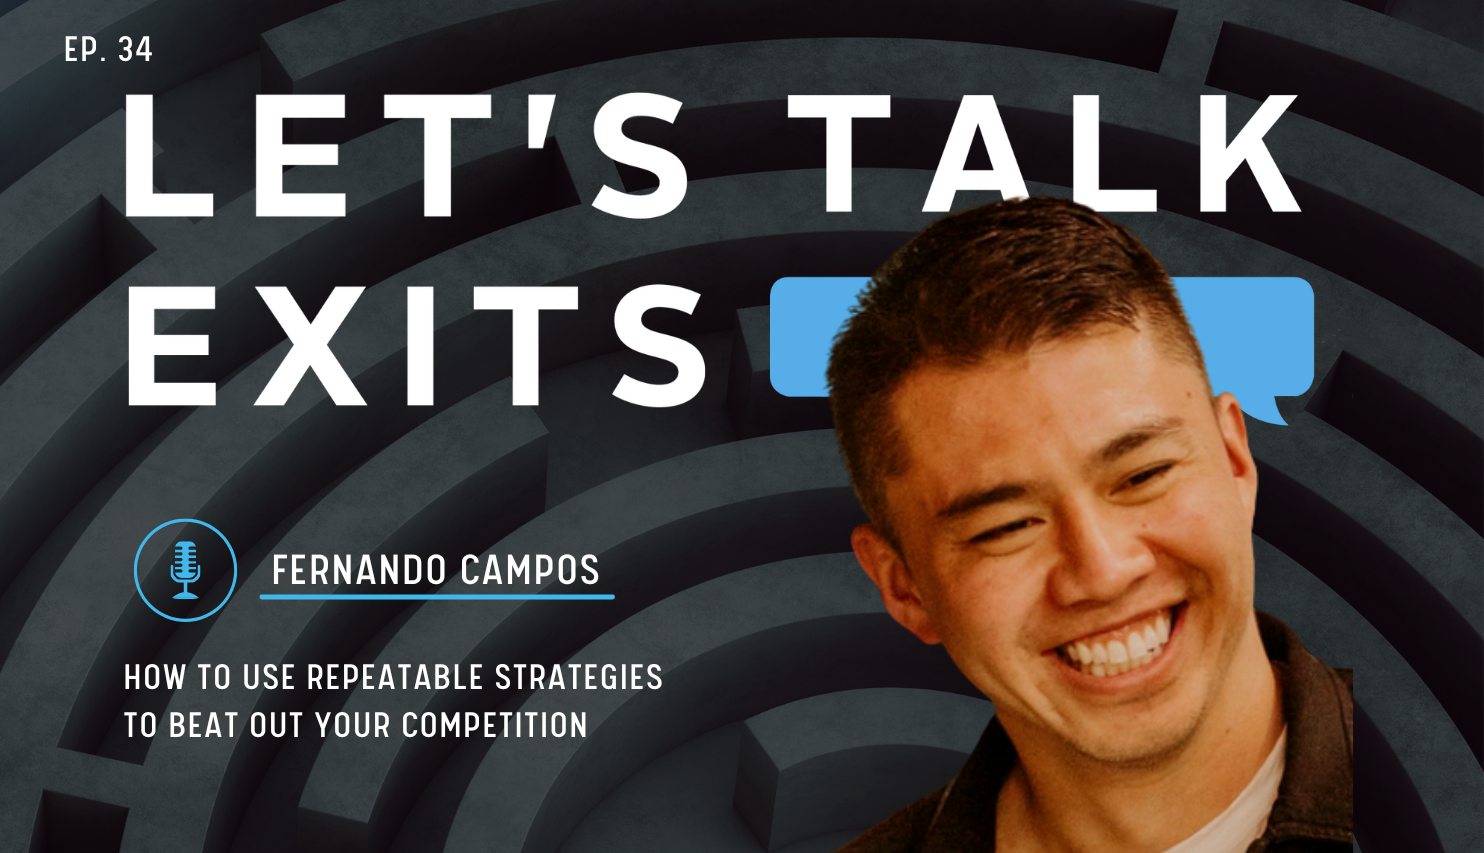 How to Use Repeatable Strategies to Beat Out Your Competition with Fernando Campos